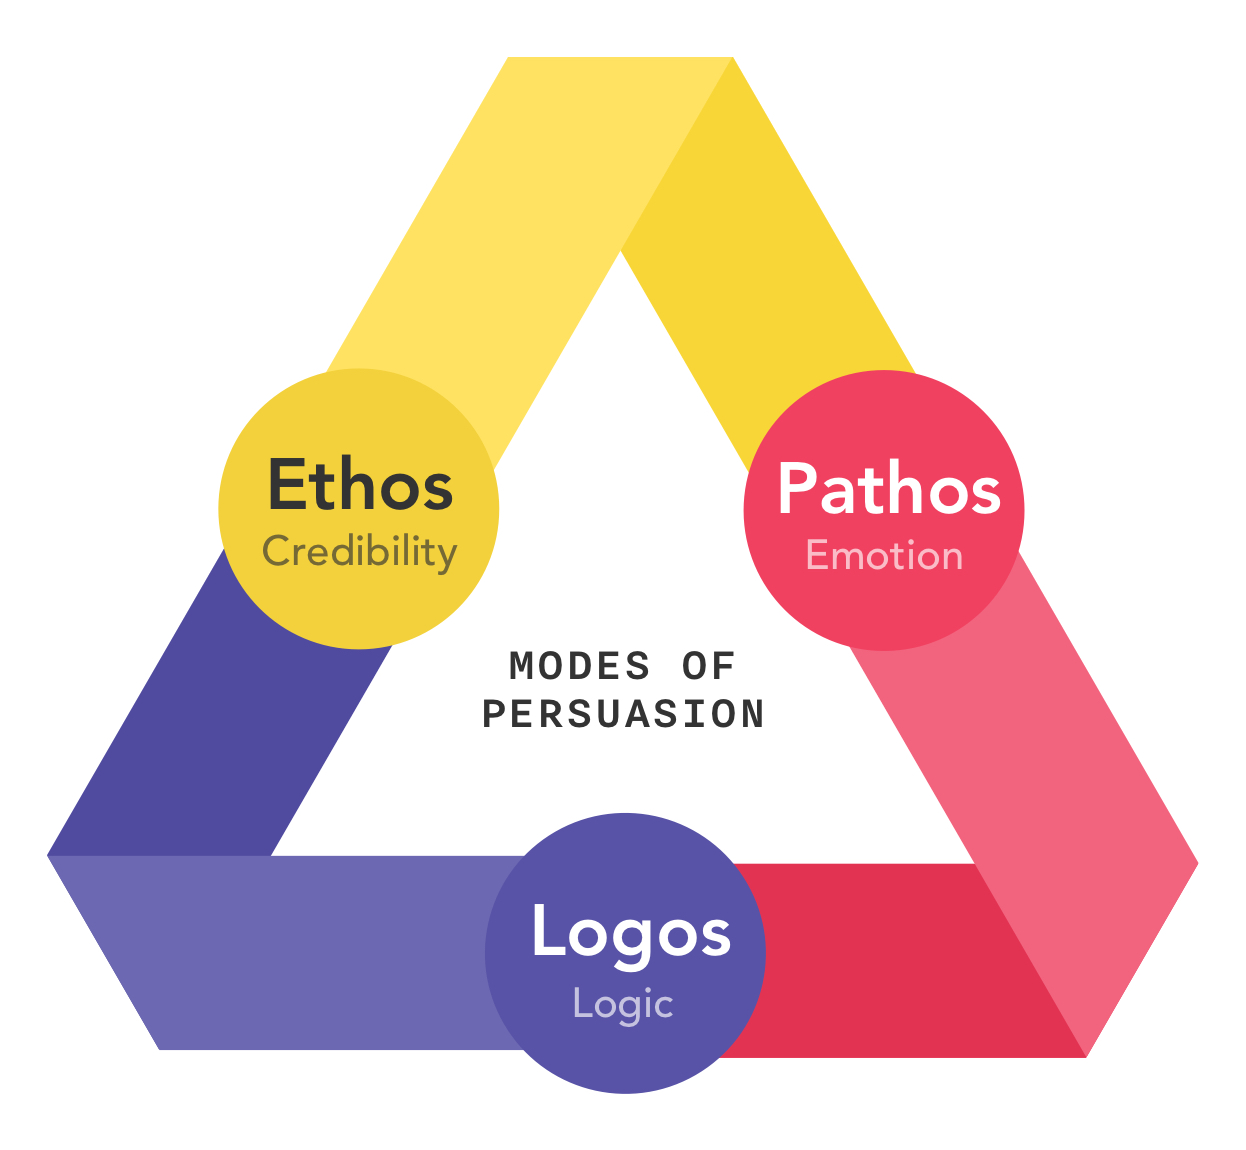 triangle showing ethos (credibility), pathos (emotion), and logos (logic) with the title "modes of persuasion" in the center